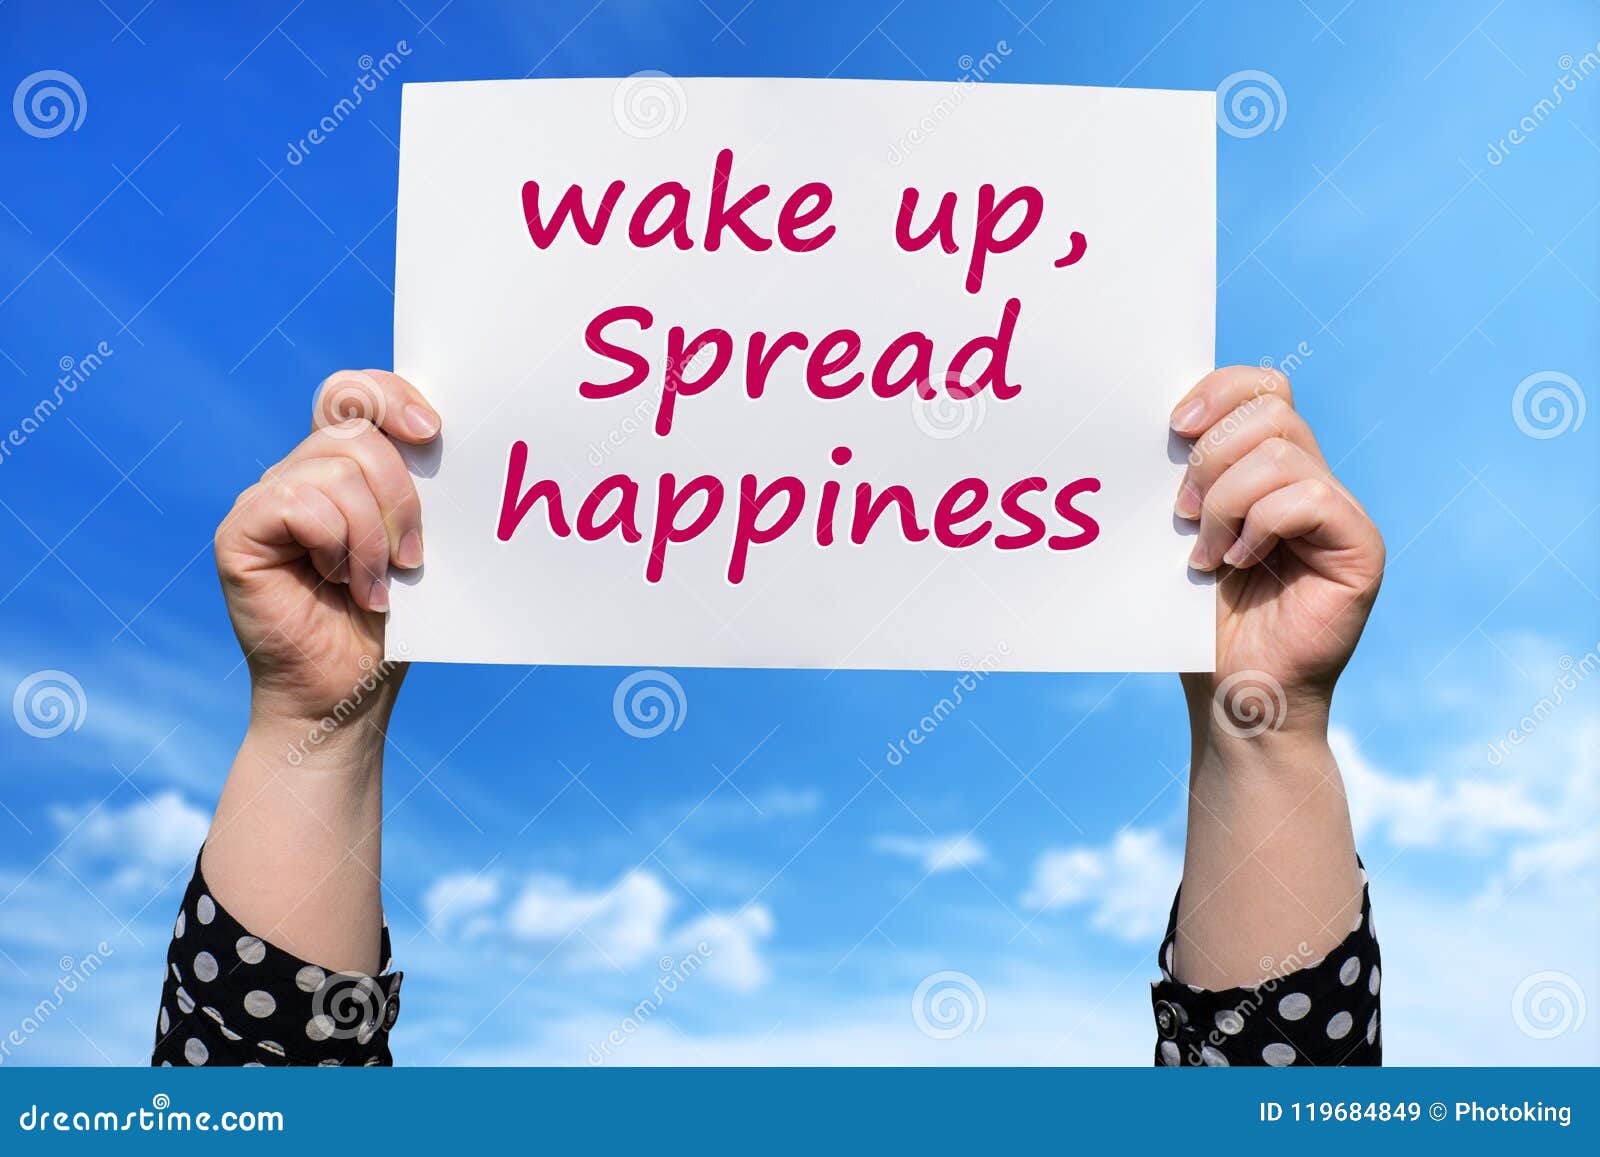 wake up, spread happiness